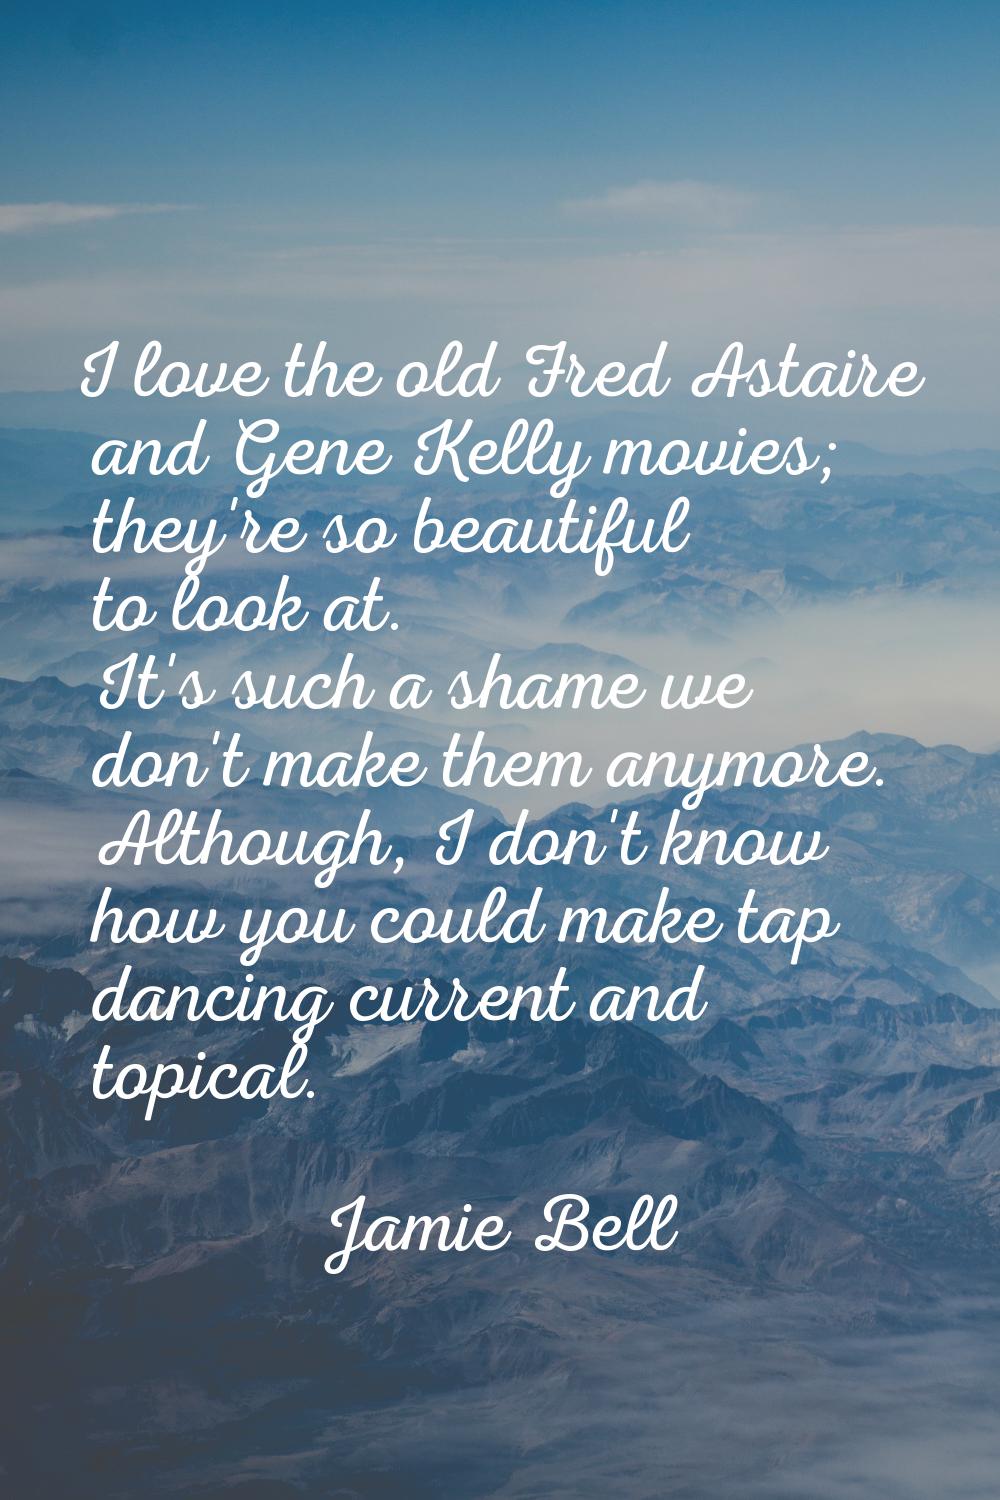 I love the old Fred Astaire and Gene Kelly movies; they're so beautiful to look at. It's such a sha